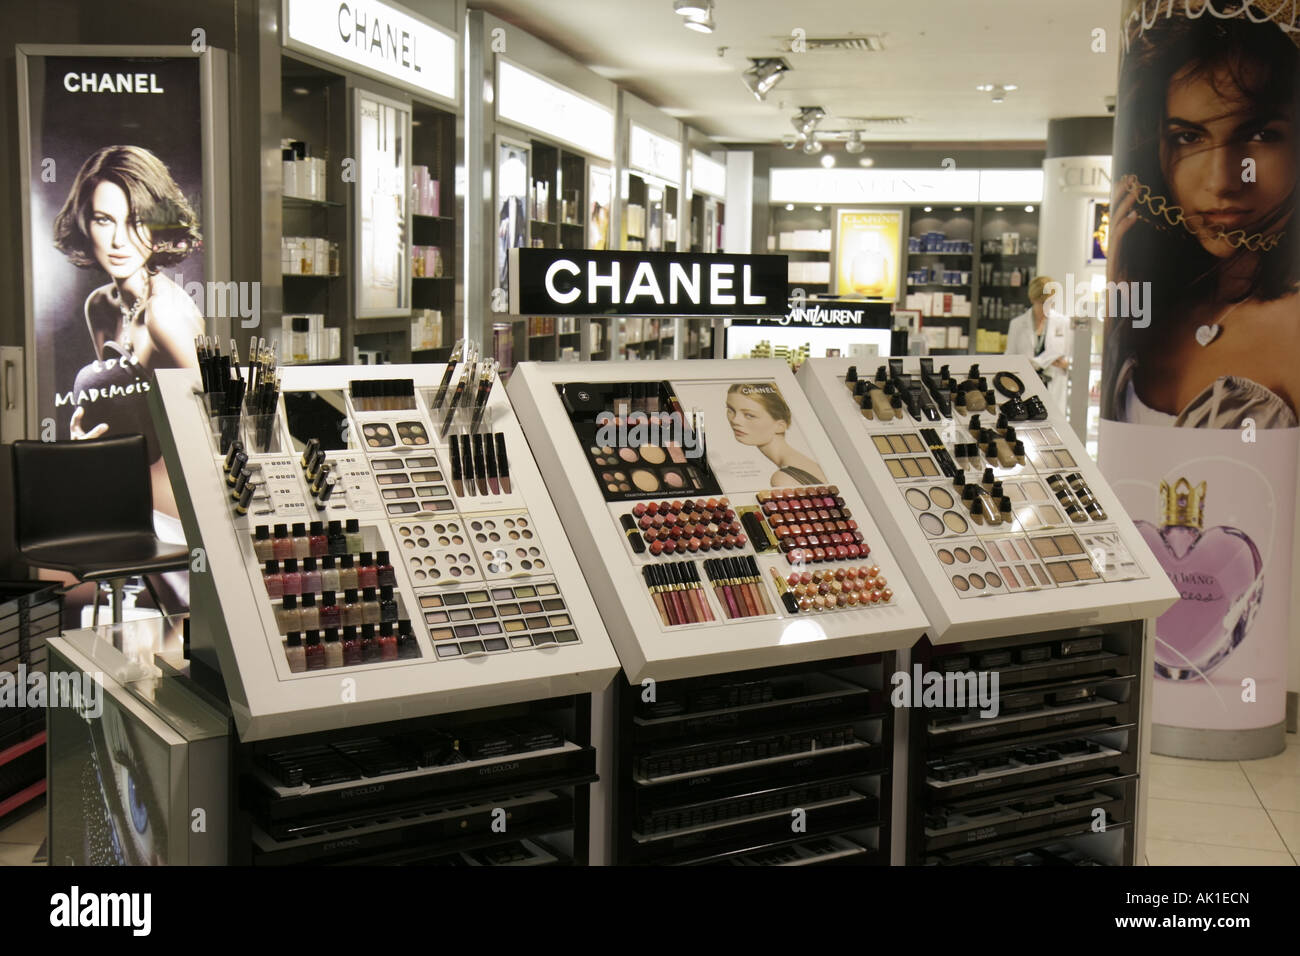 England Manchester UK Manchester Airport Chanel products makeup Stock ...